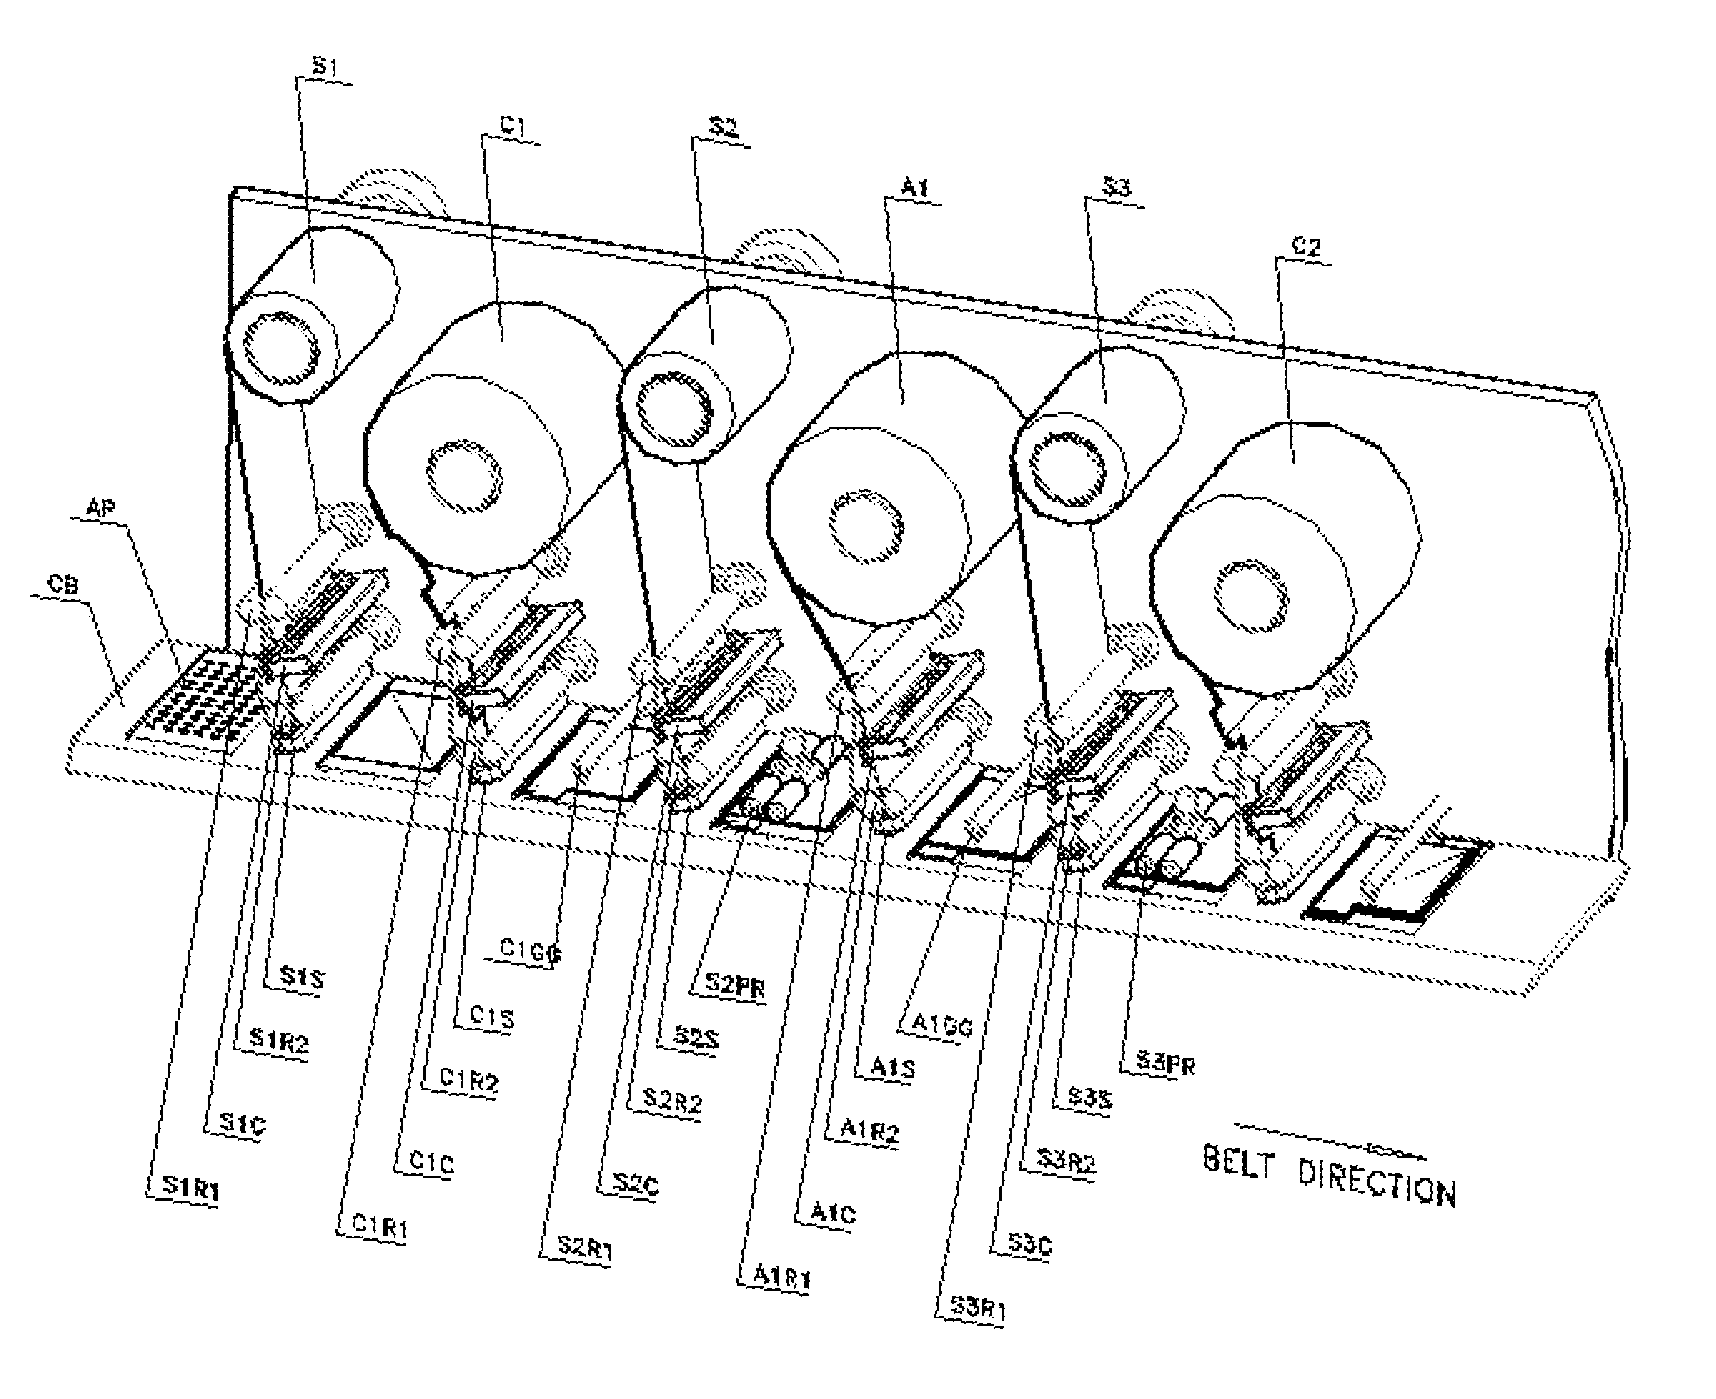 Continuous prismatic cell stacking system and method